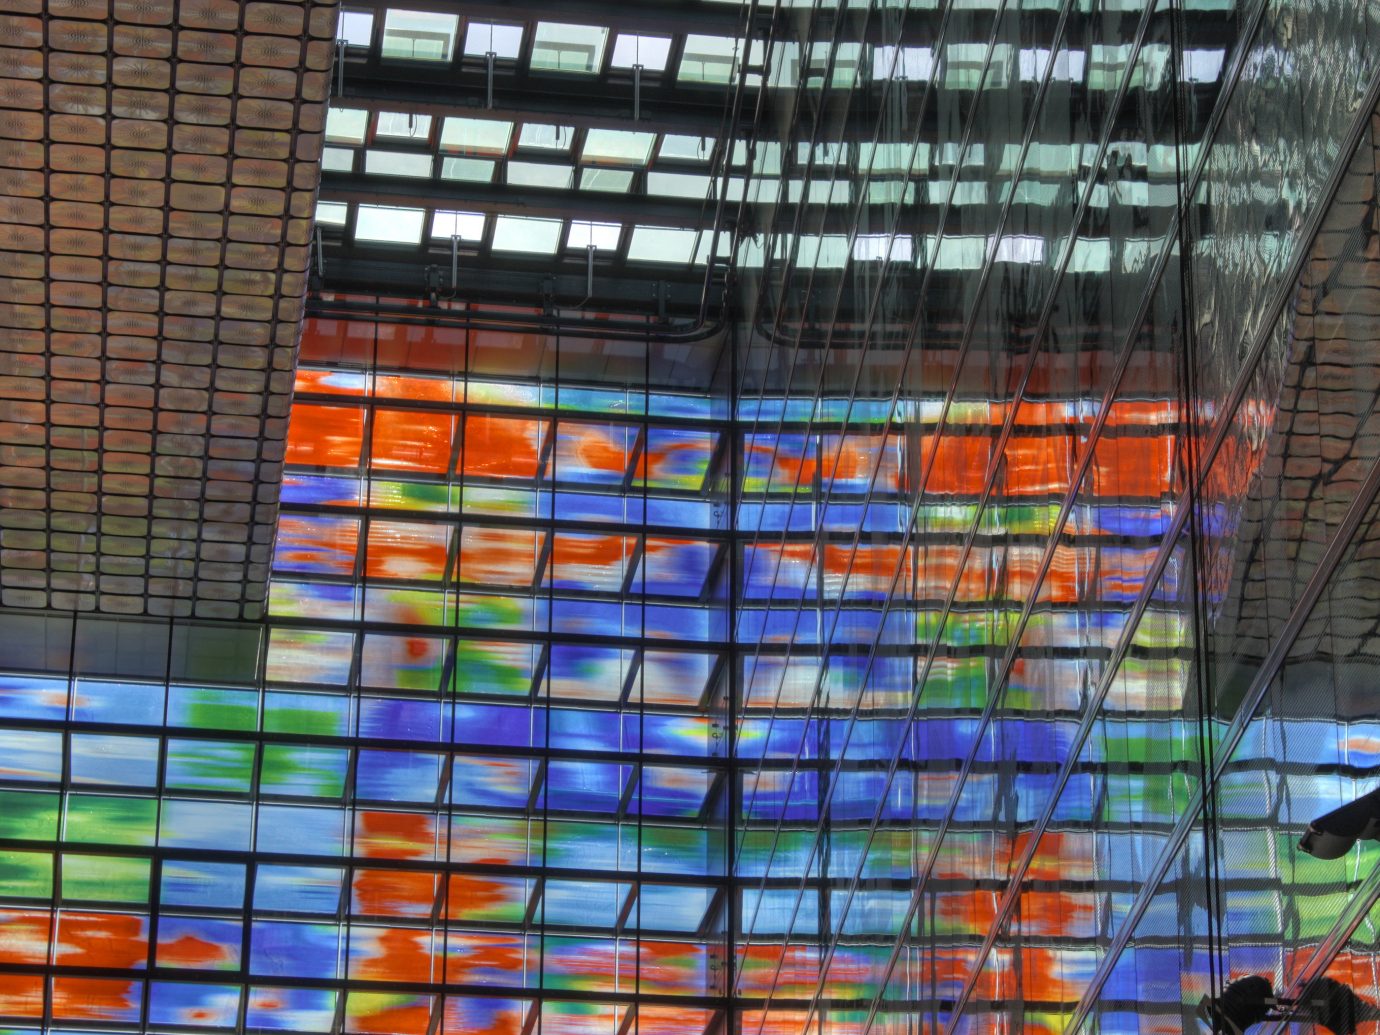 Offbeat building color window urban area glass wall stained glass art Design material cage net tiled